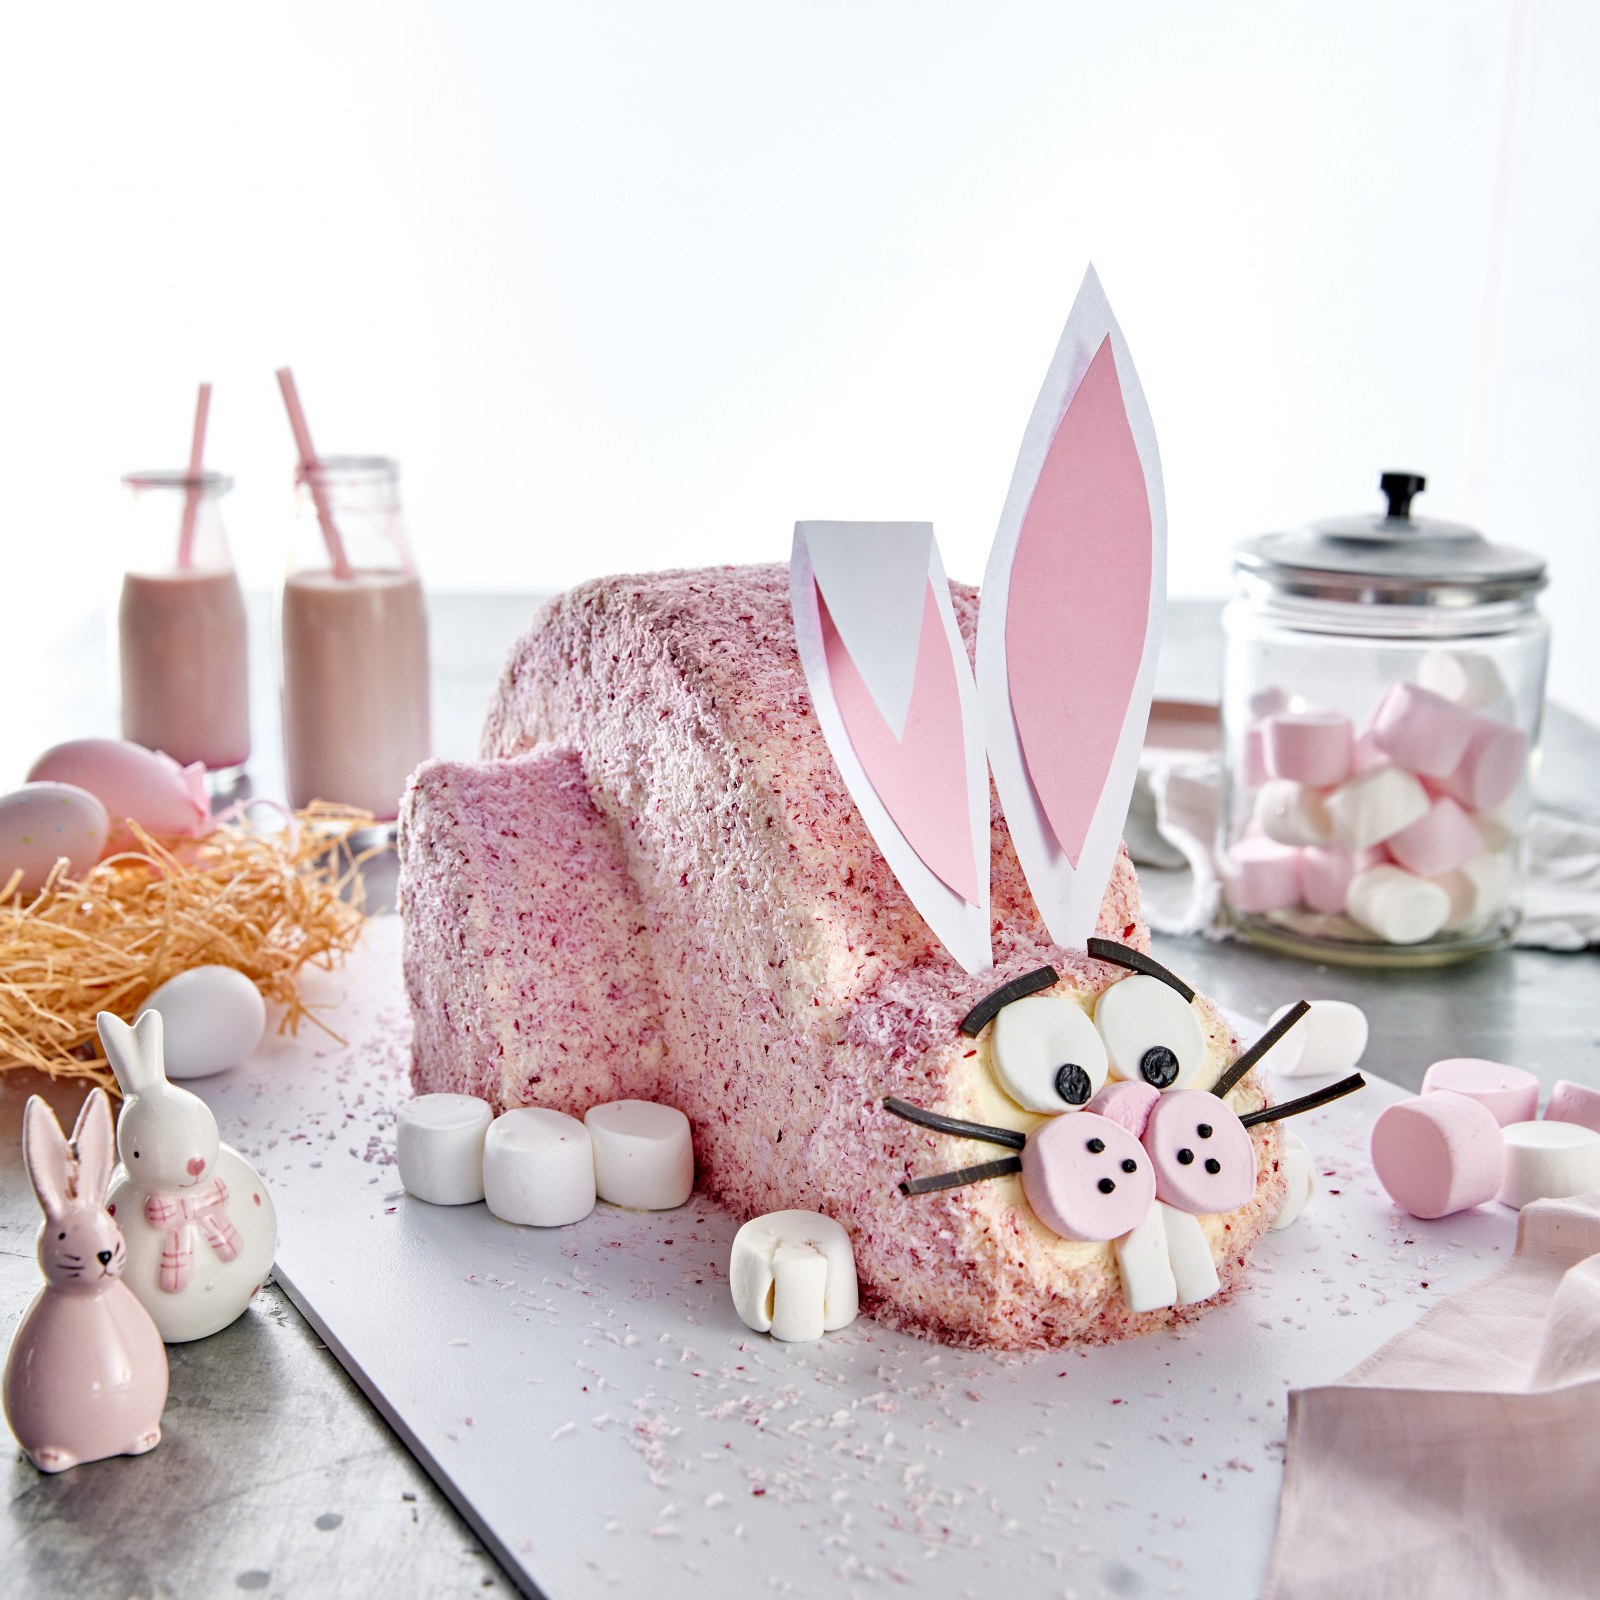 Bunny Cake Perfect for Easter or Birthday!